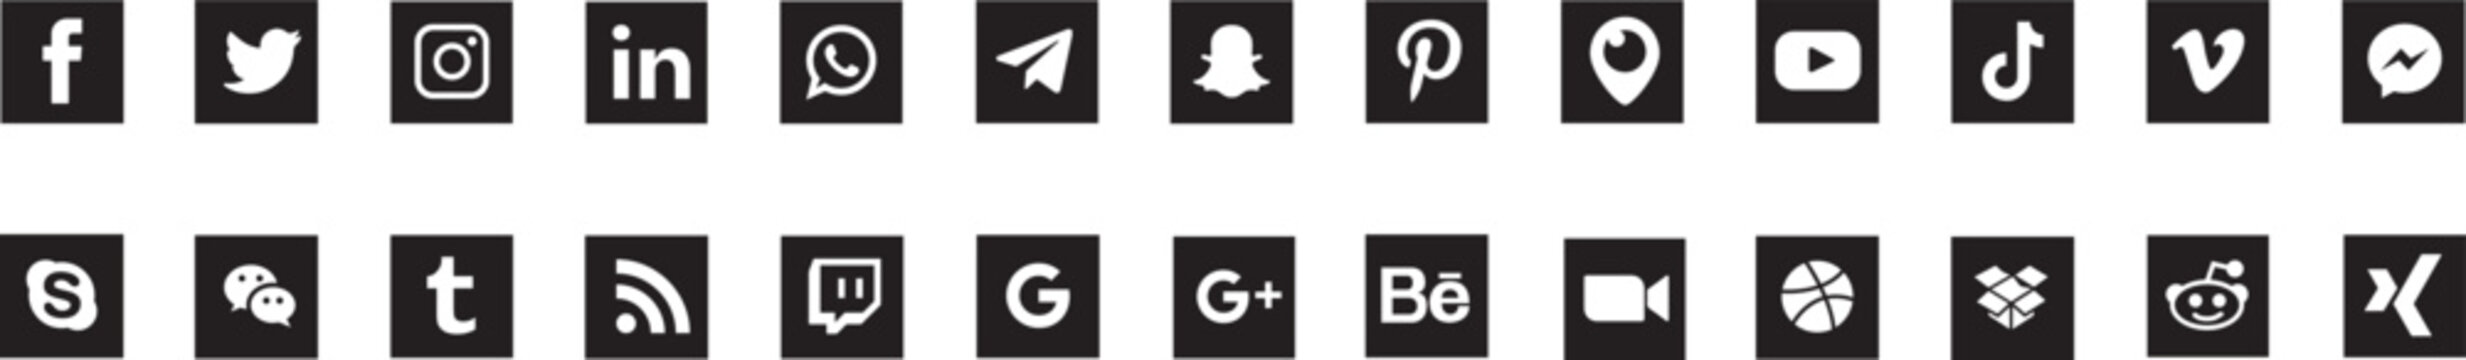 Sets of social media icons with square design with black  background. Vector editorial